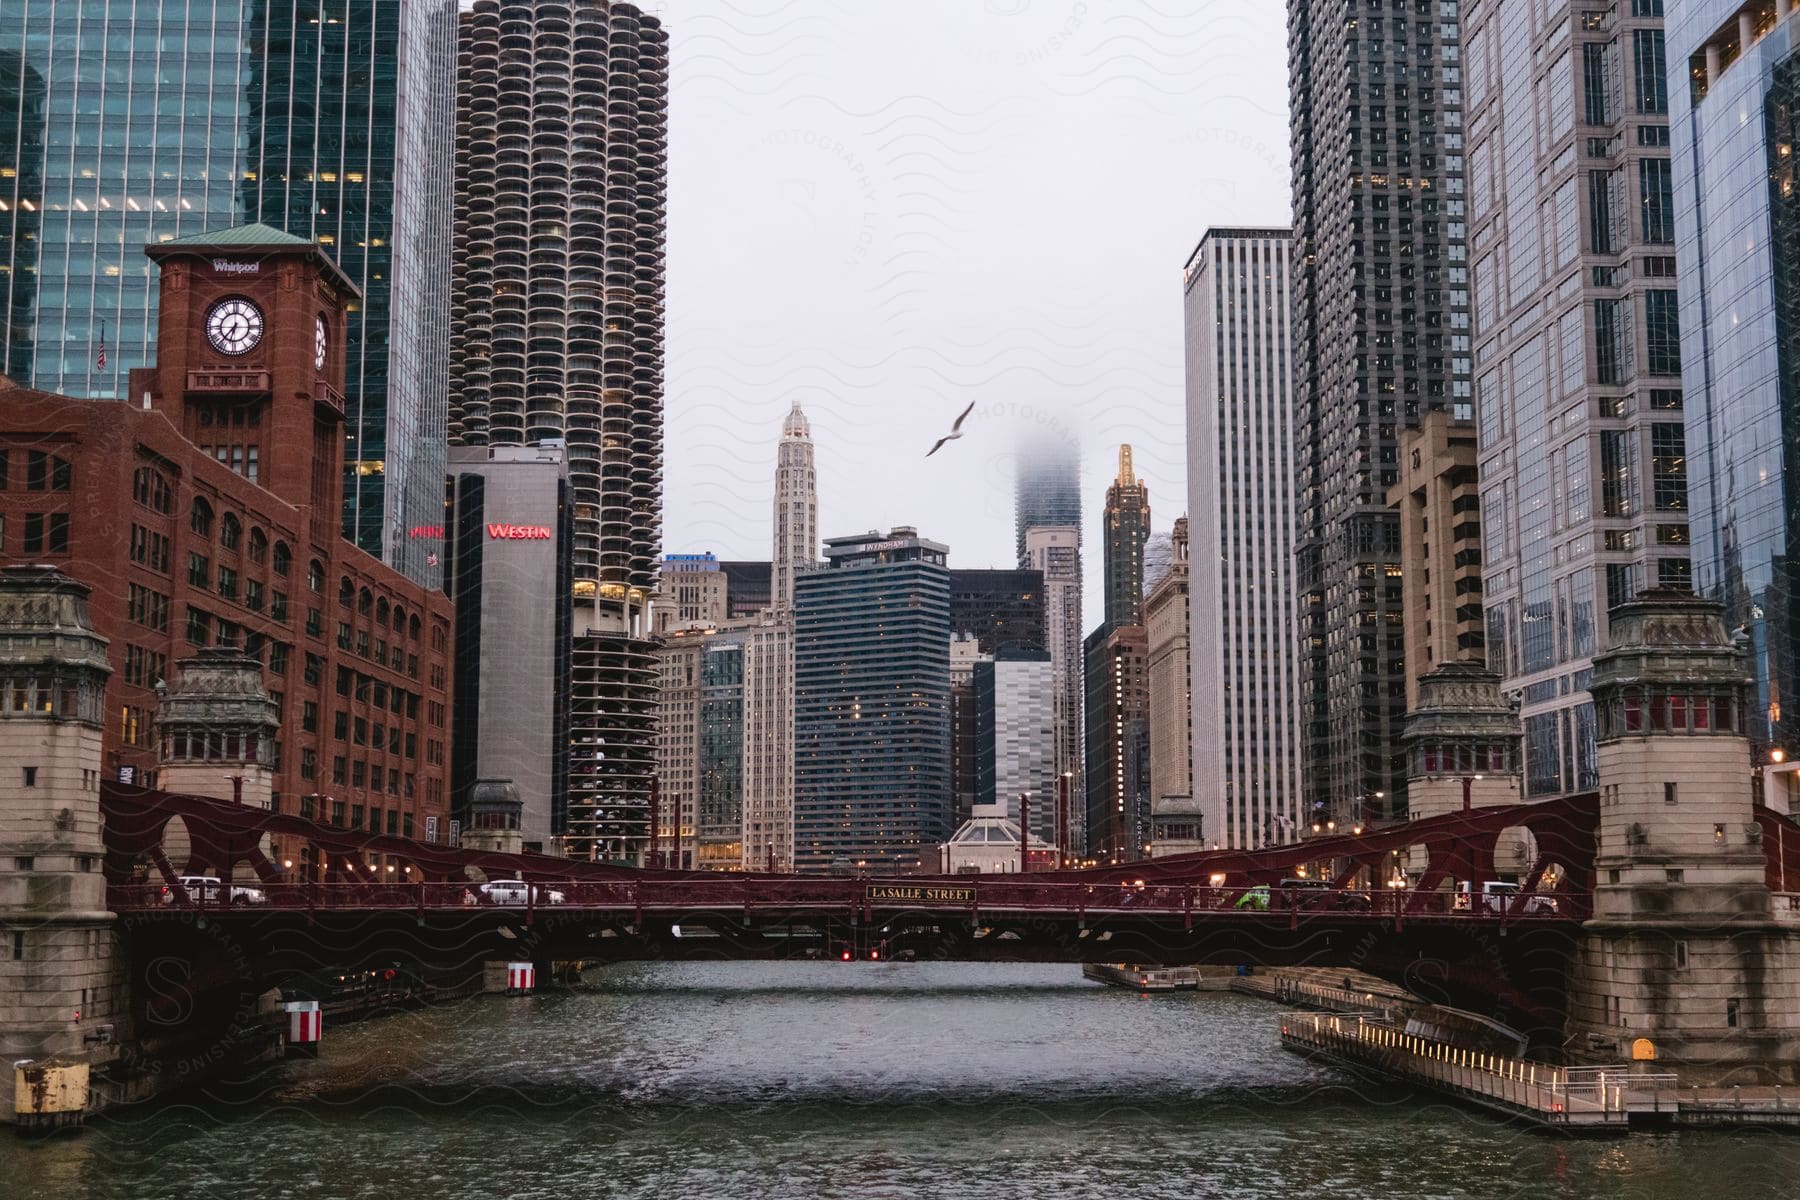 Marshall suloway bridge and high rise buildings on a cloudy day in chicago